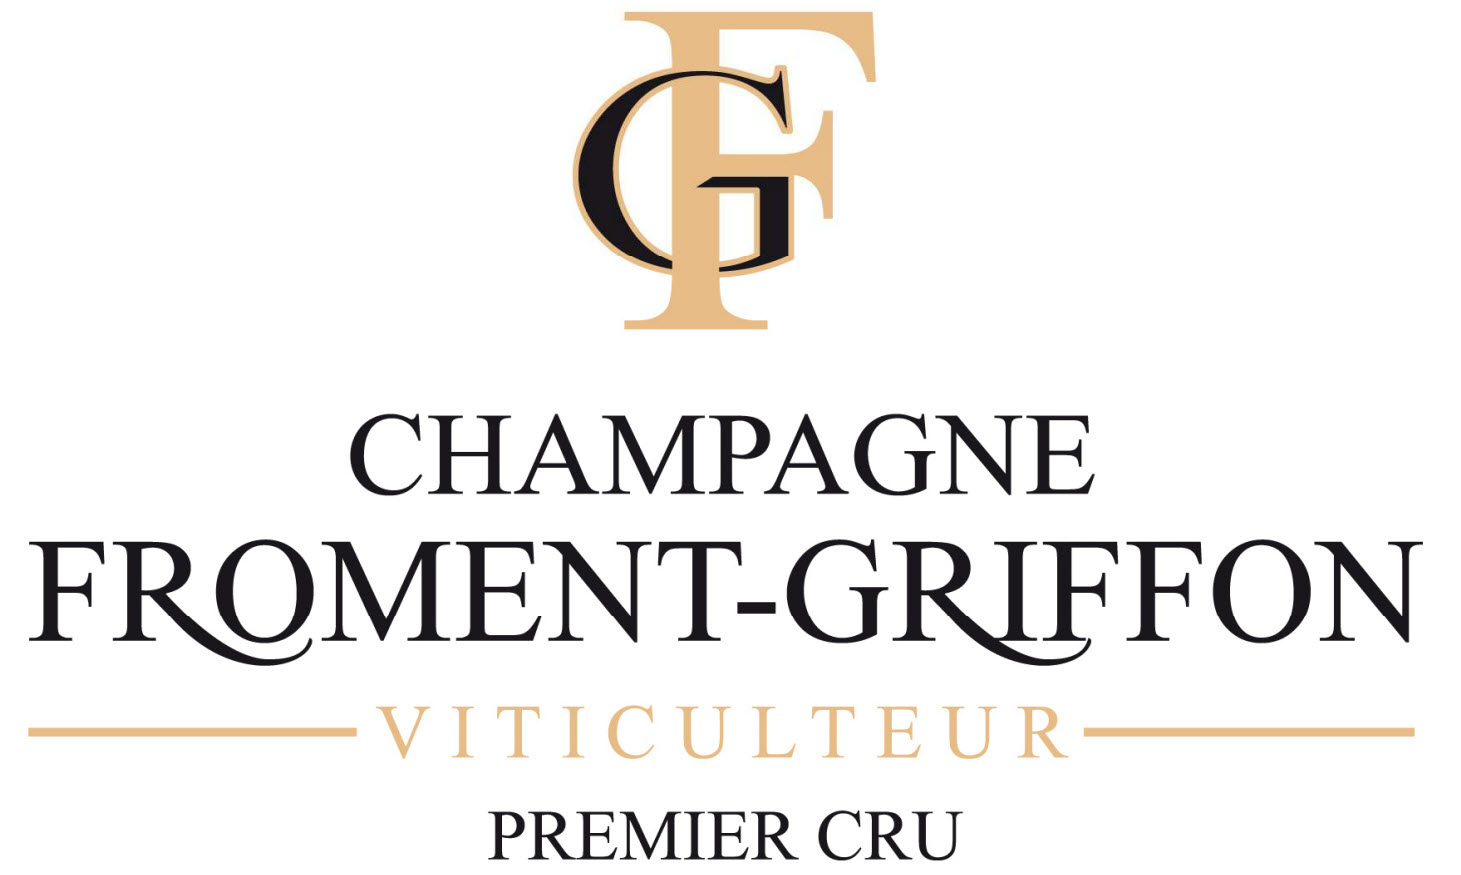 Champagne Froment-Griffon